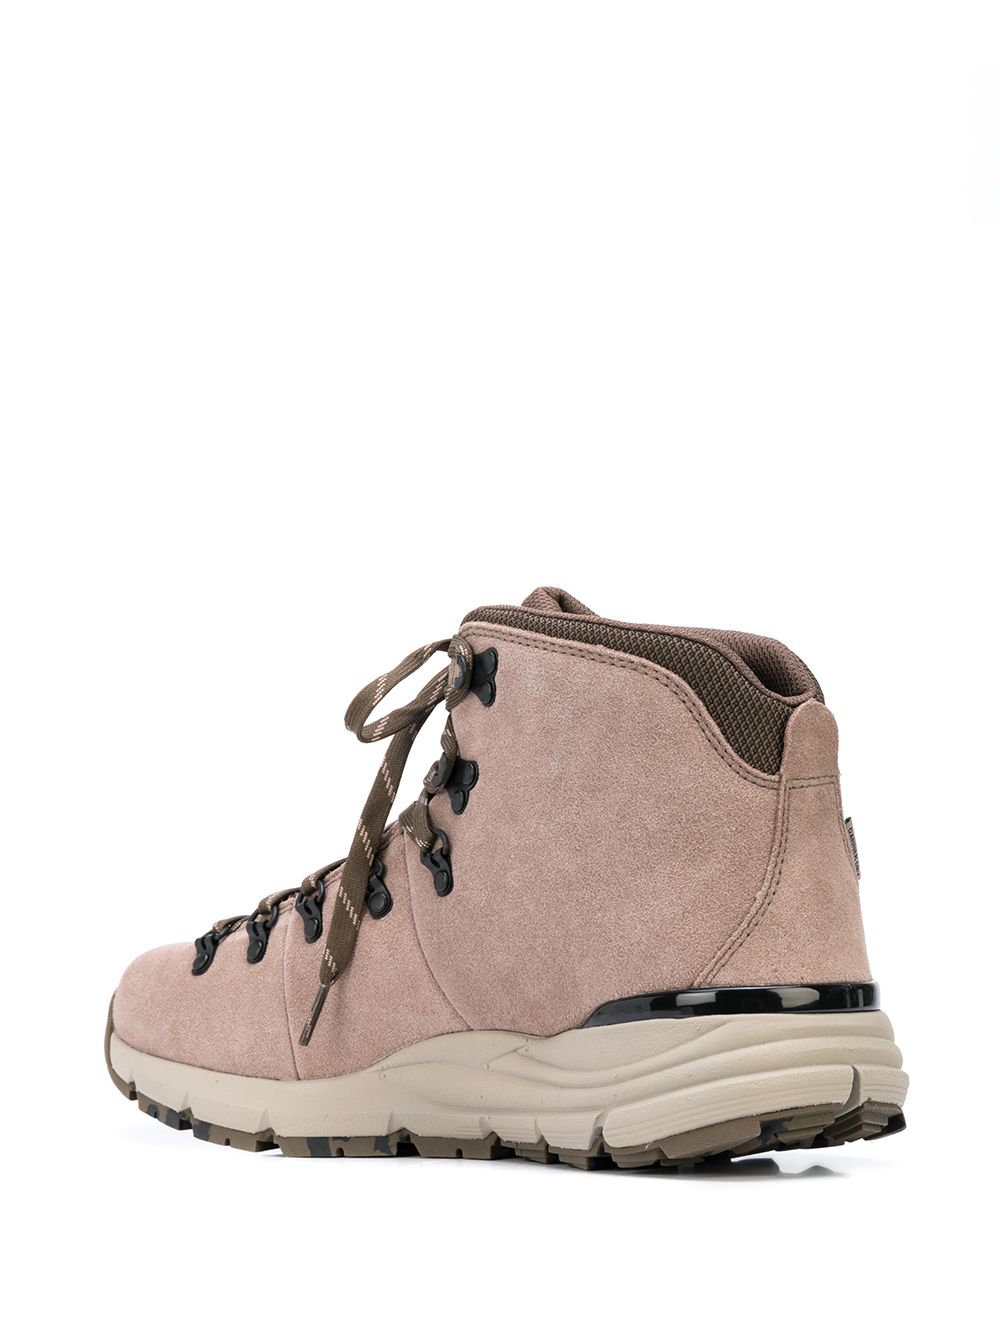 фото Danner lace-up mountain boots